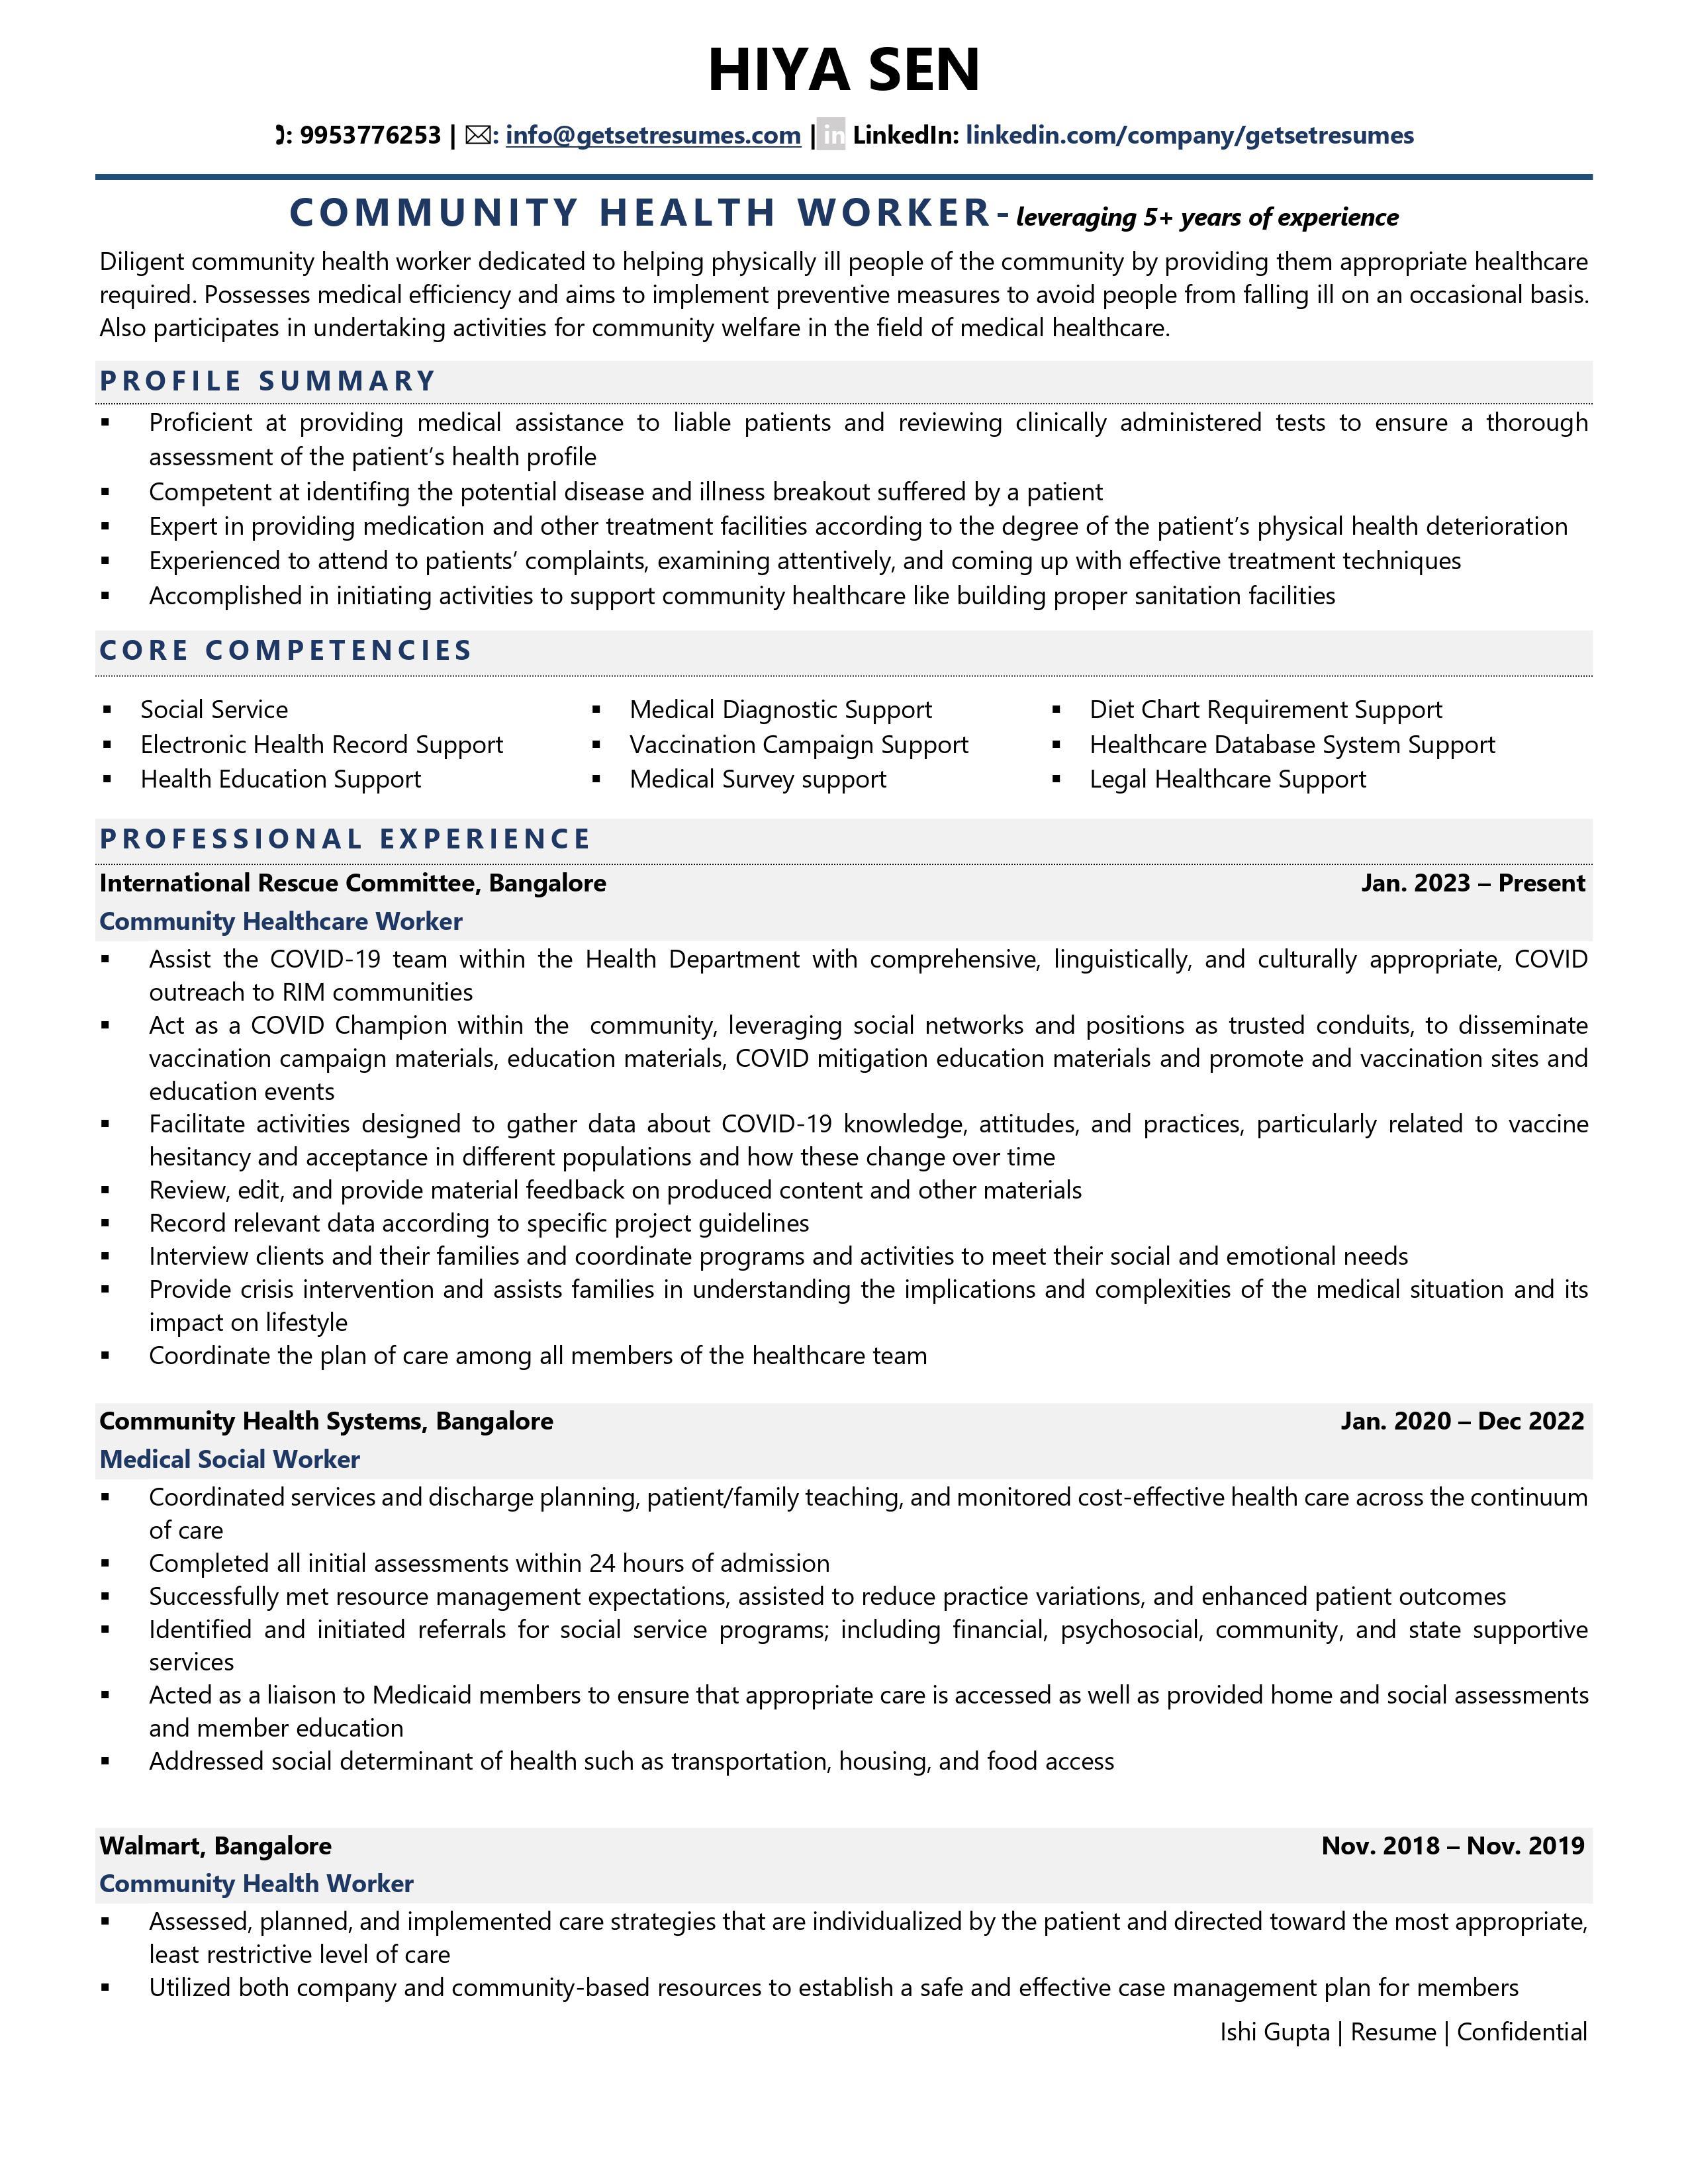 resume for community support worker